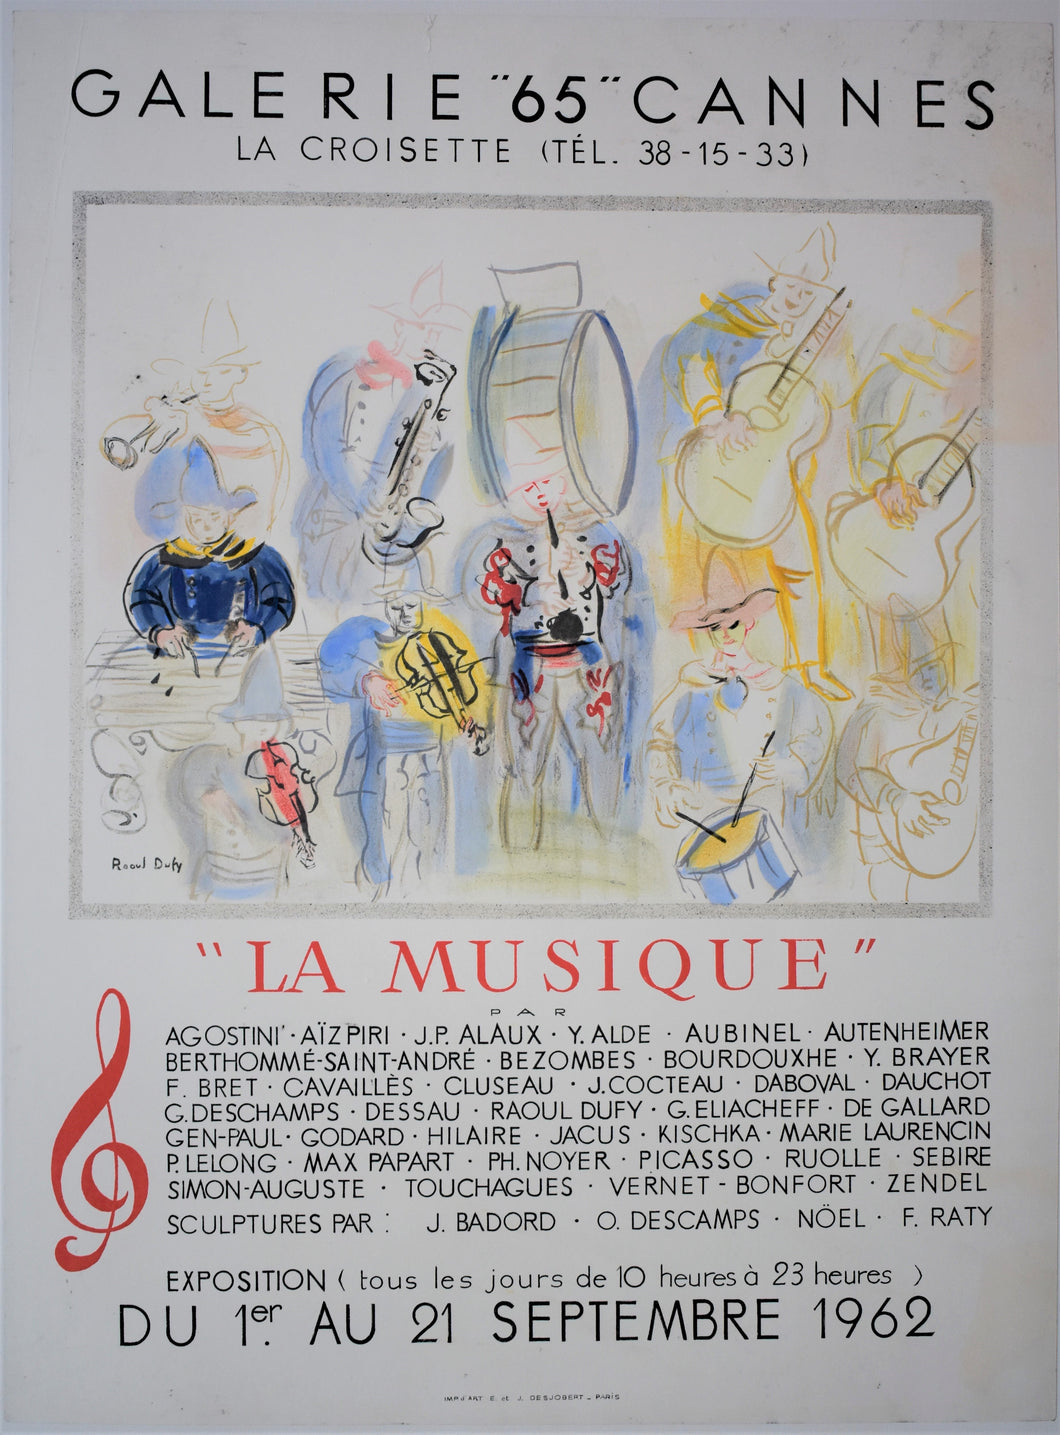 Cannes Art Gallery Raoul Dufy Exhibition Poster